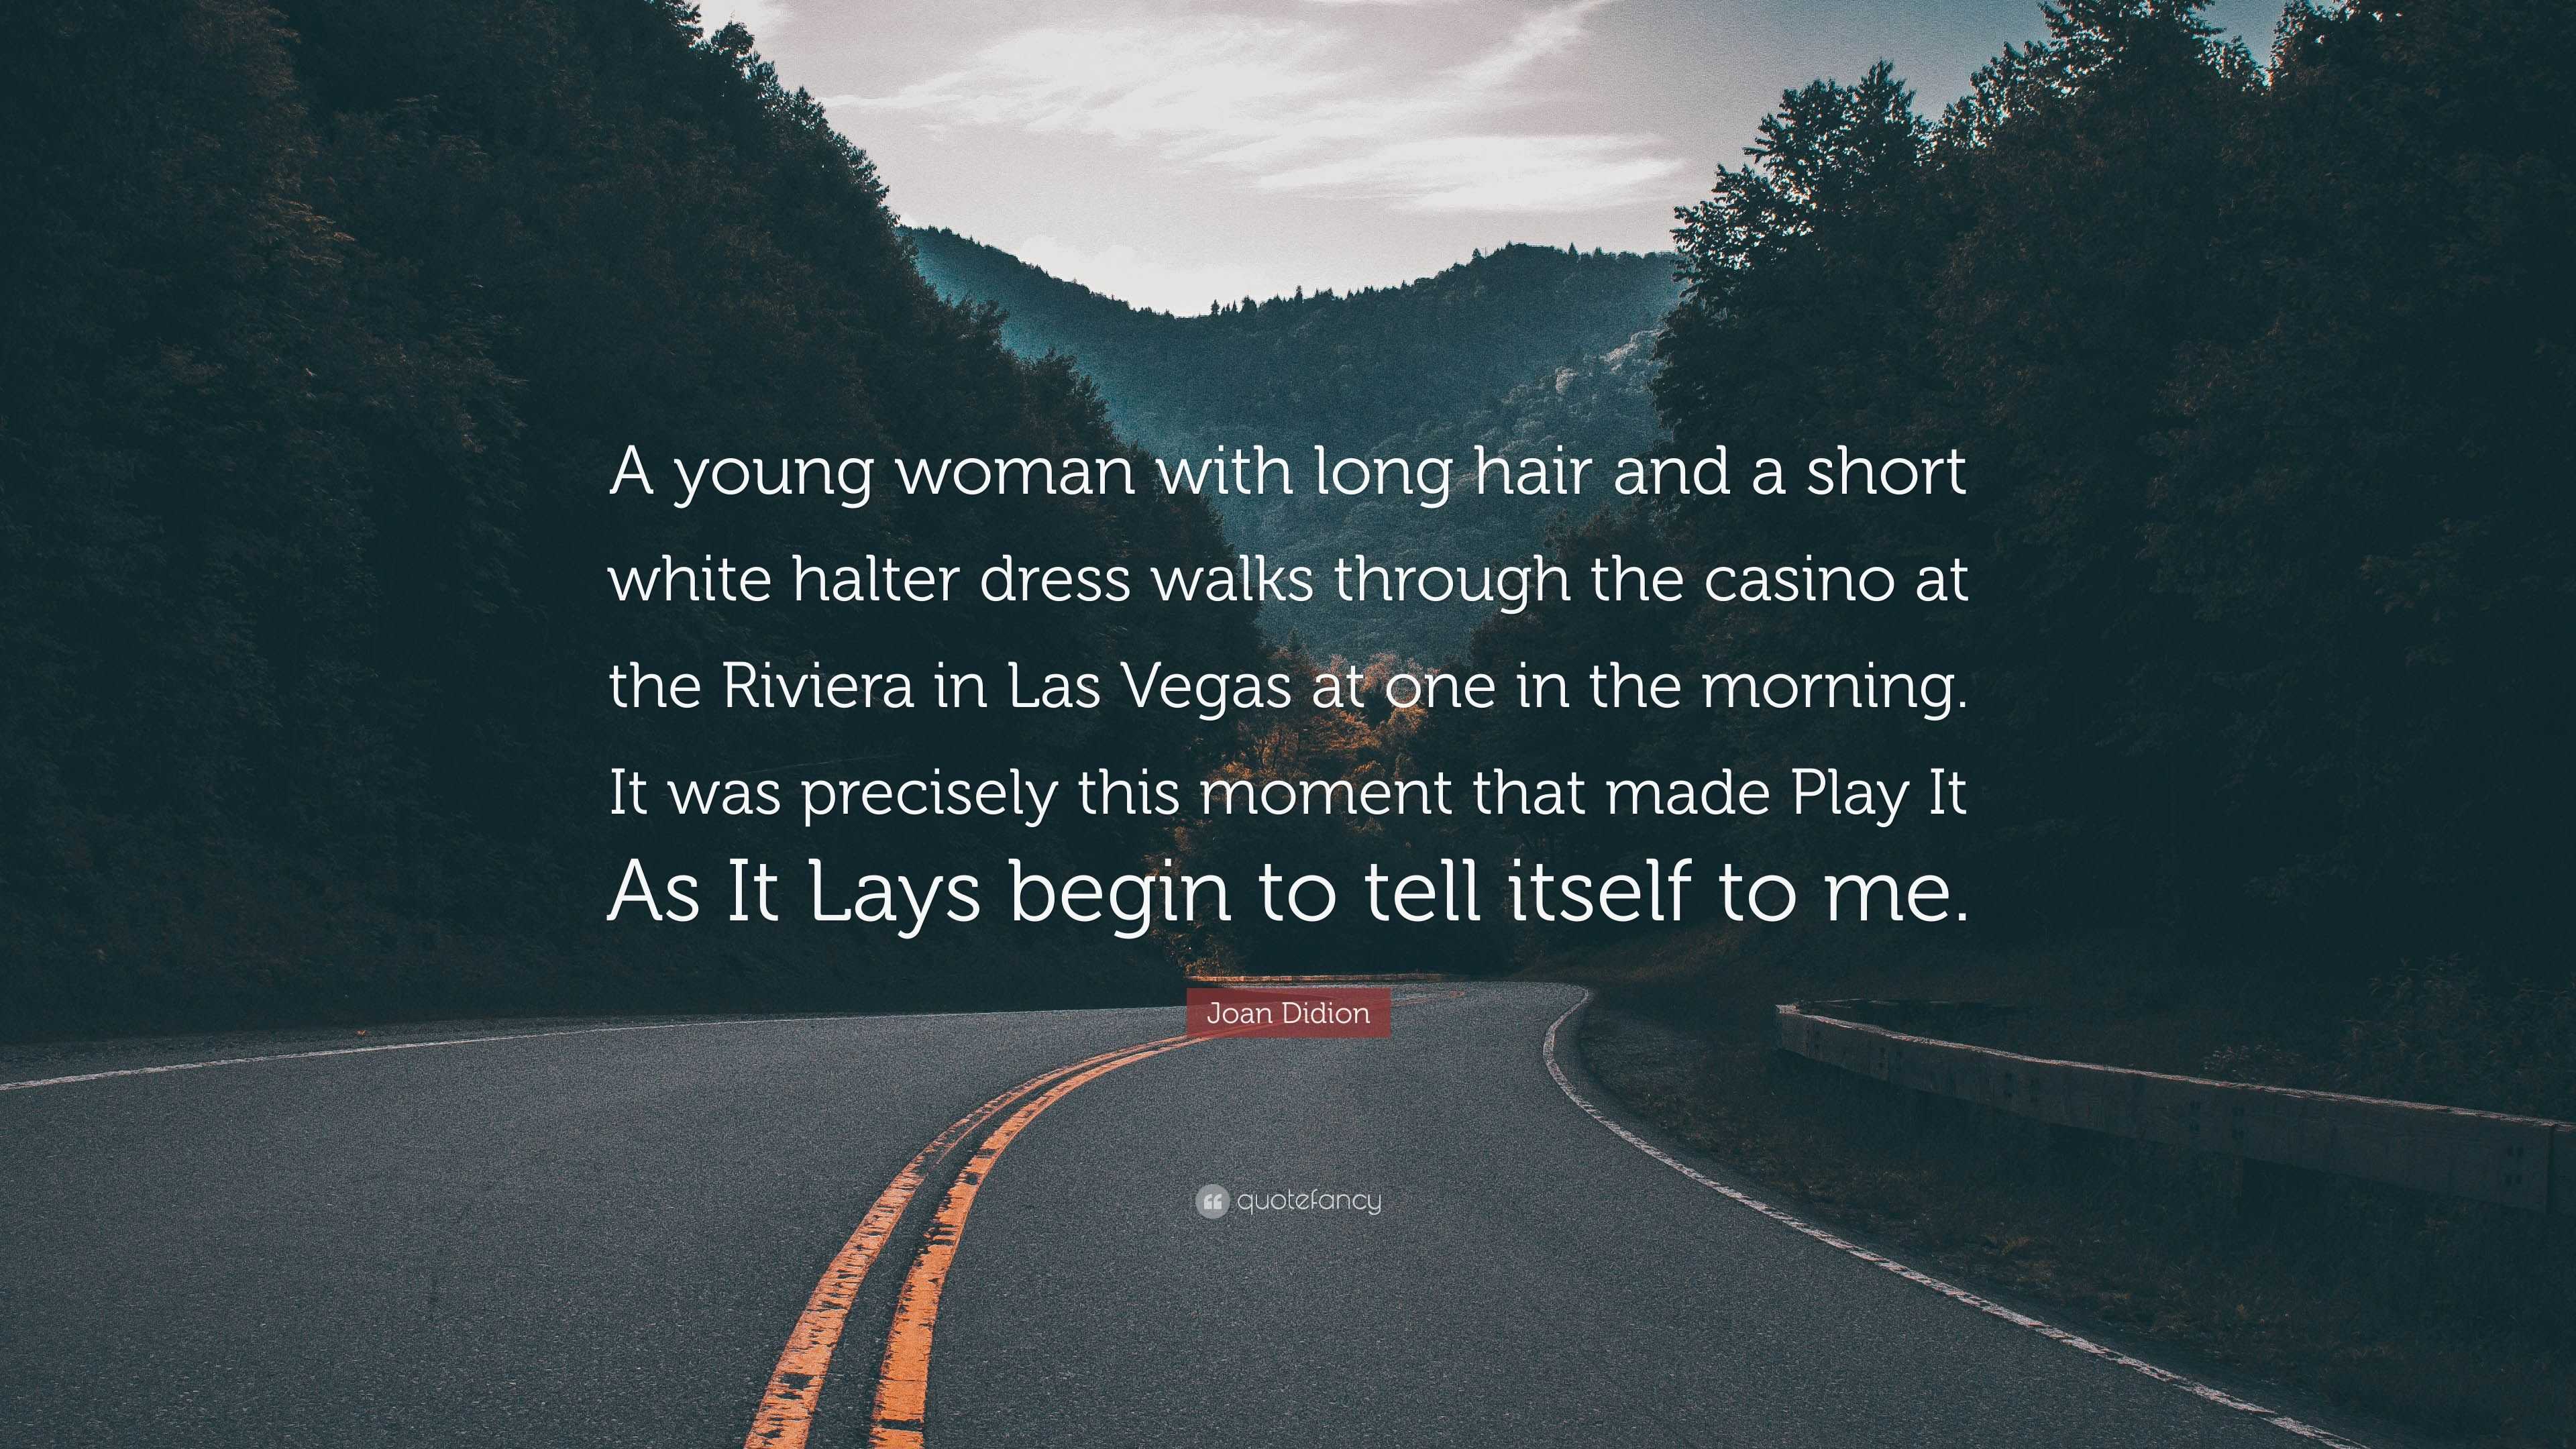 Joan Didion Quote: “A young woman with long hair and a short white halter  dress walks through the casino at the Riviera in Las Vegas at one ”